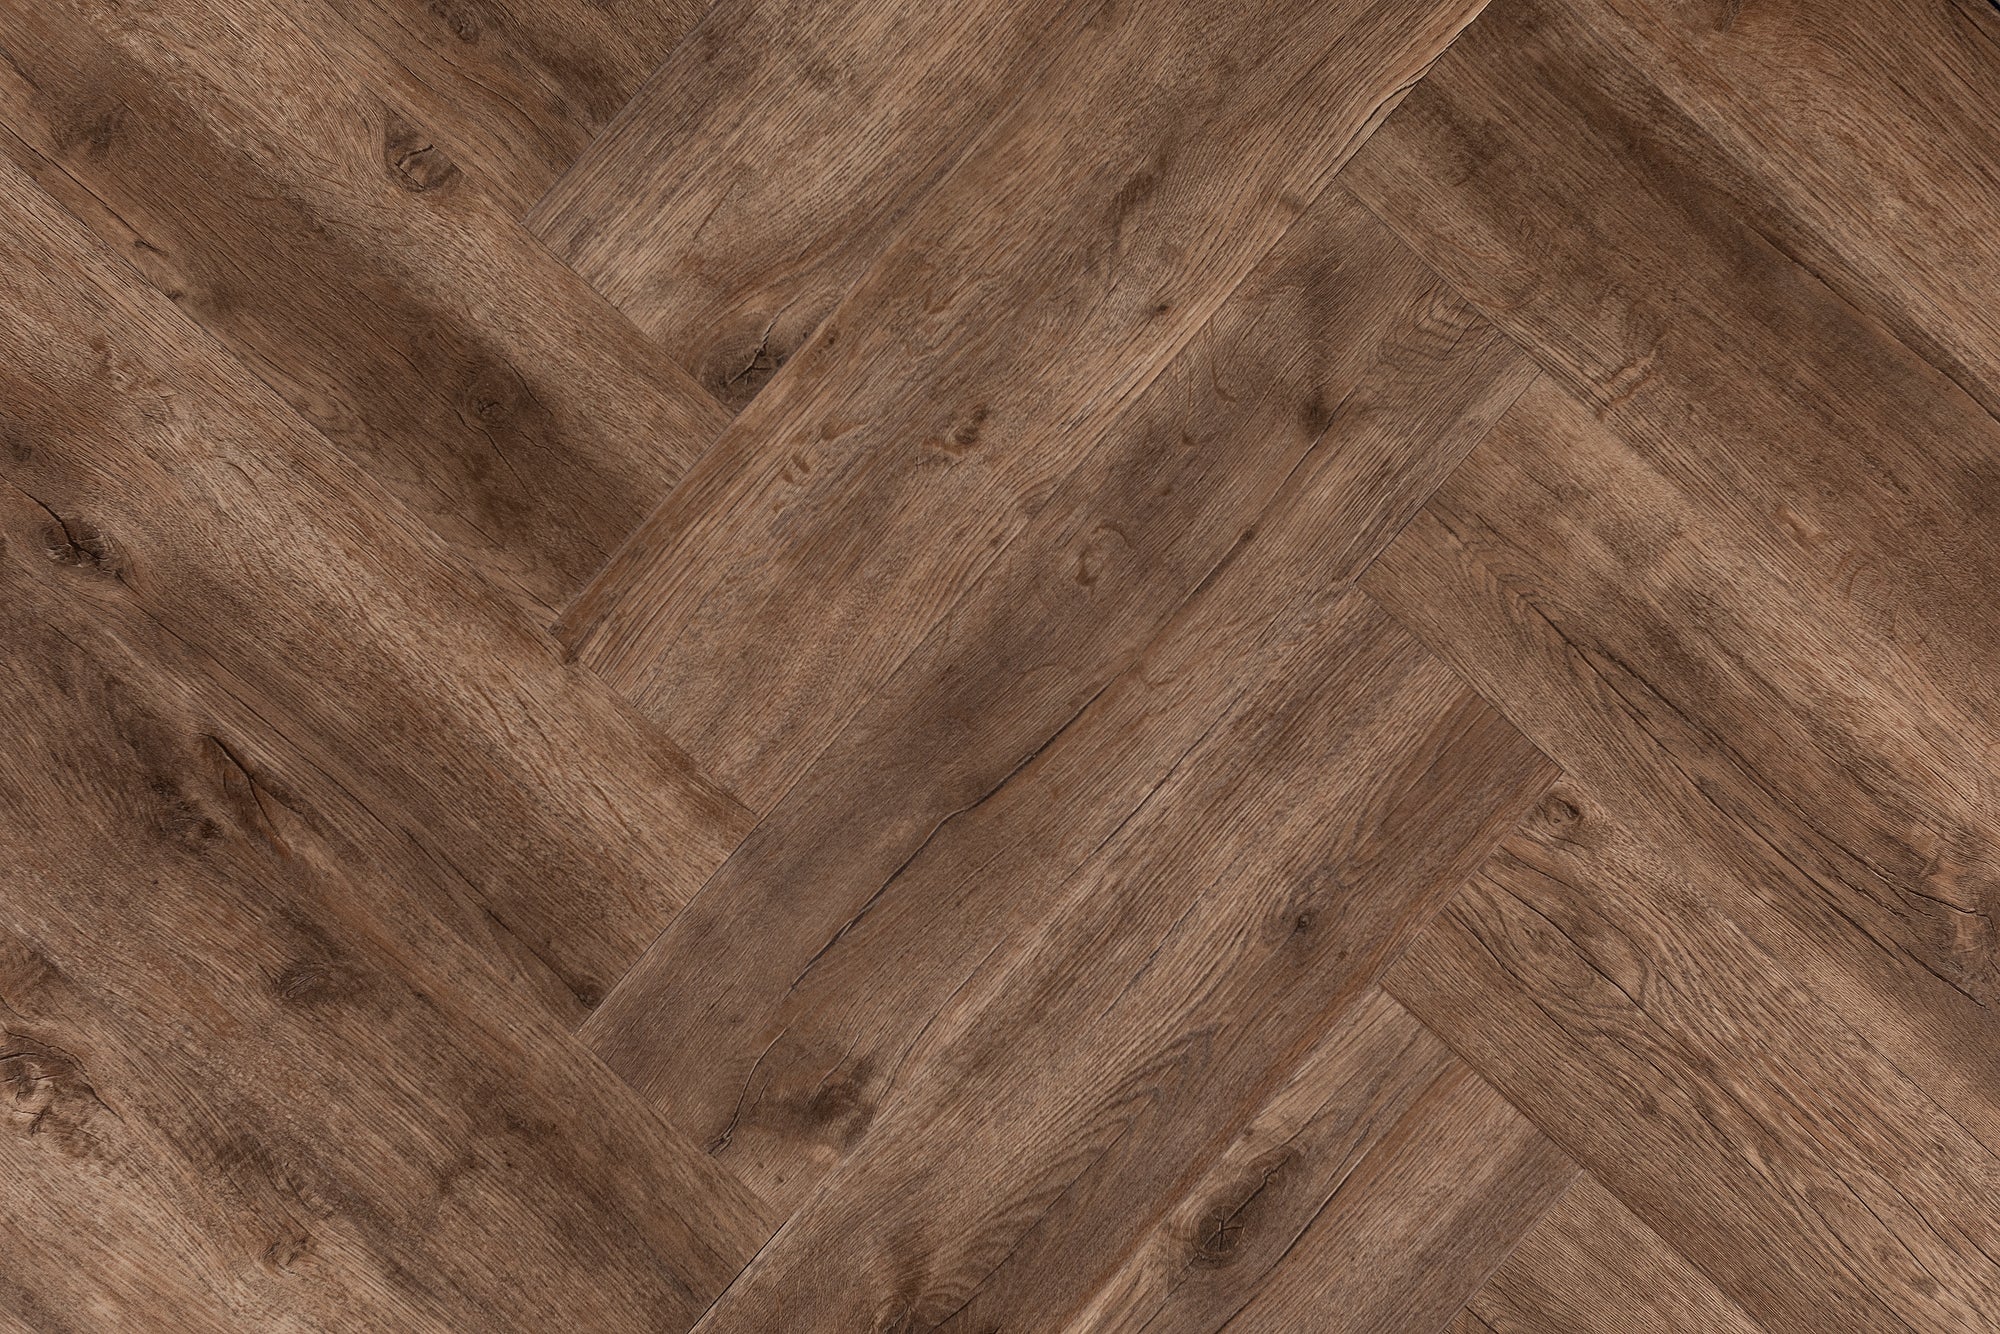 Free sample of Burnt Cocoa Glue Down engineered hardwood floor from our Vinyl Flooring collection